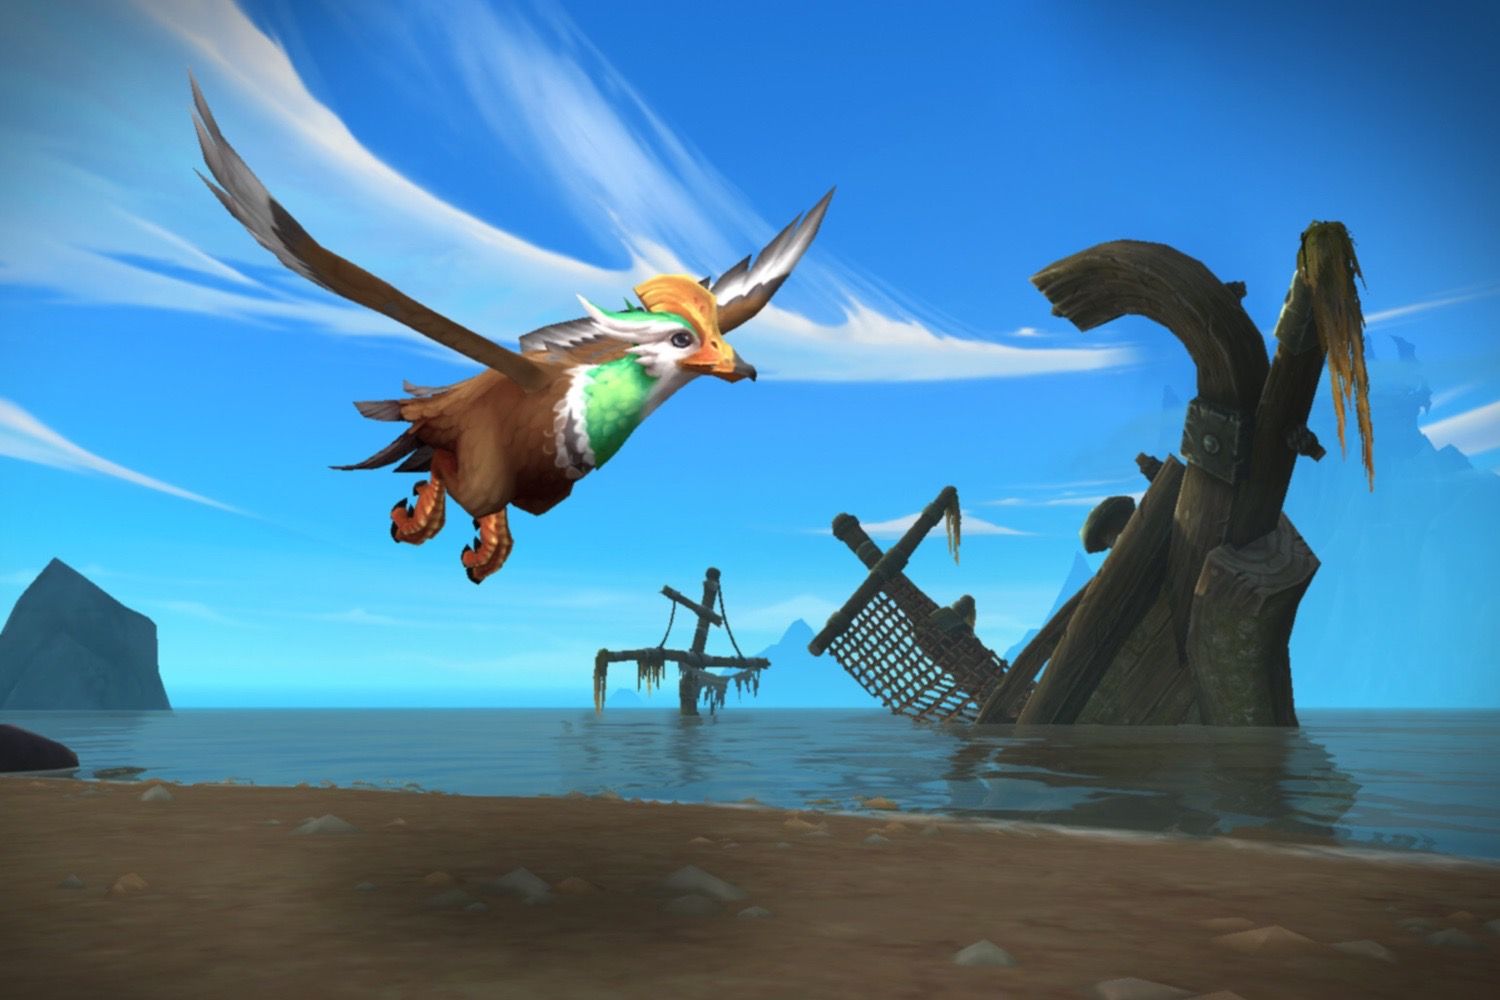 The Viridescent Duck flying over a beach with a shipwreck behind it.